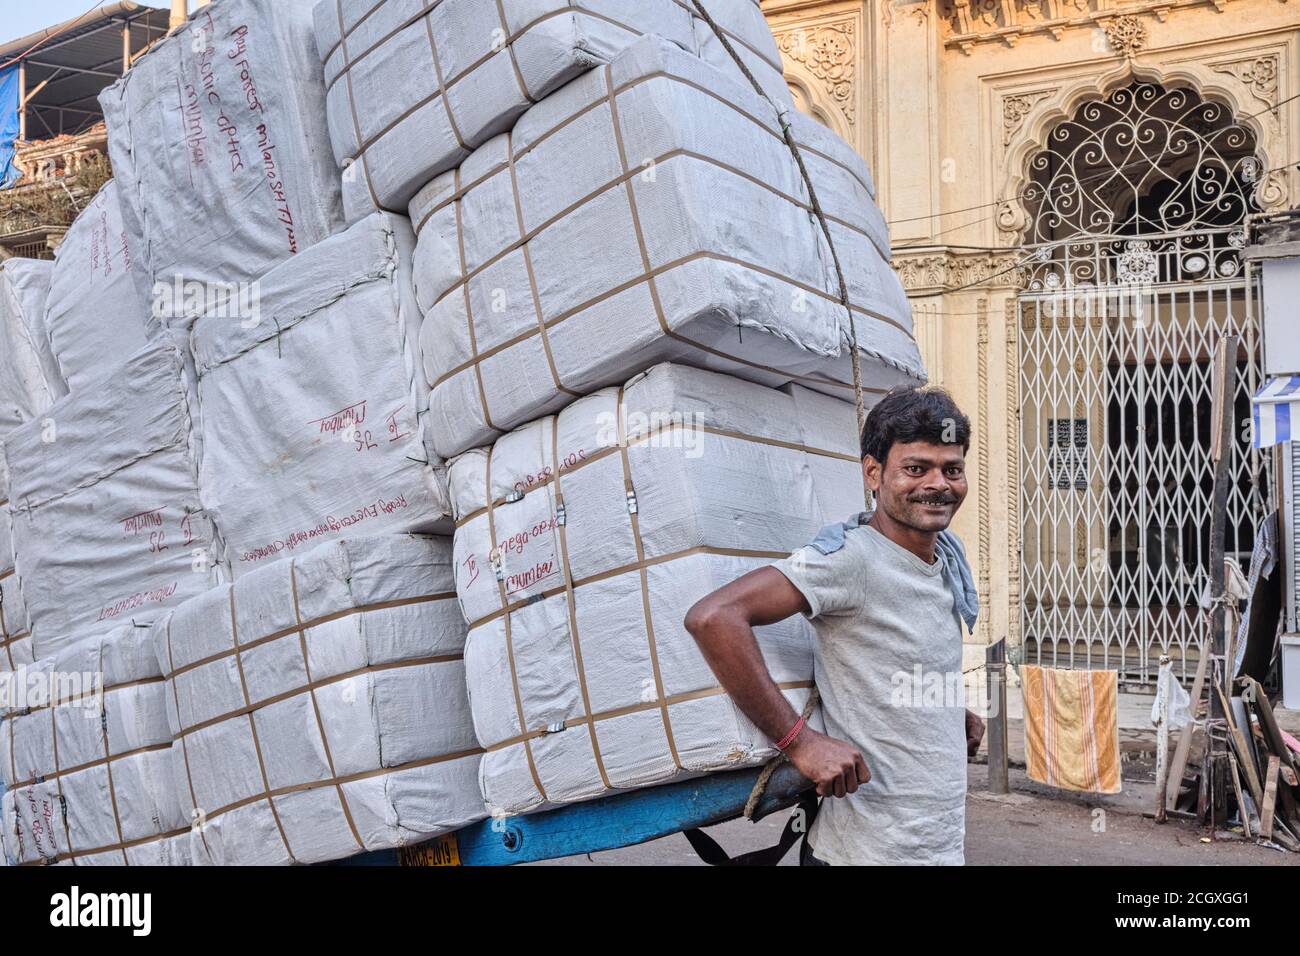 A cheerful handcart puller in Mumbai, India, pulling a cart loaded with almost a ton of bales of cloth Stock Photo